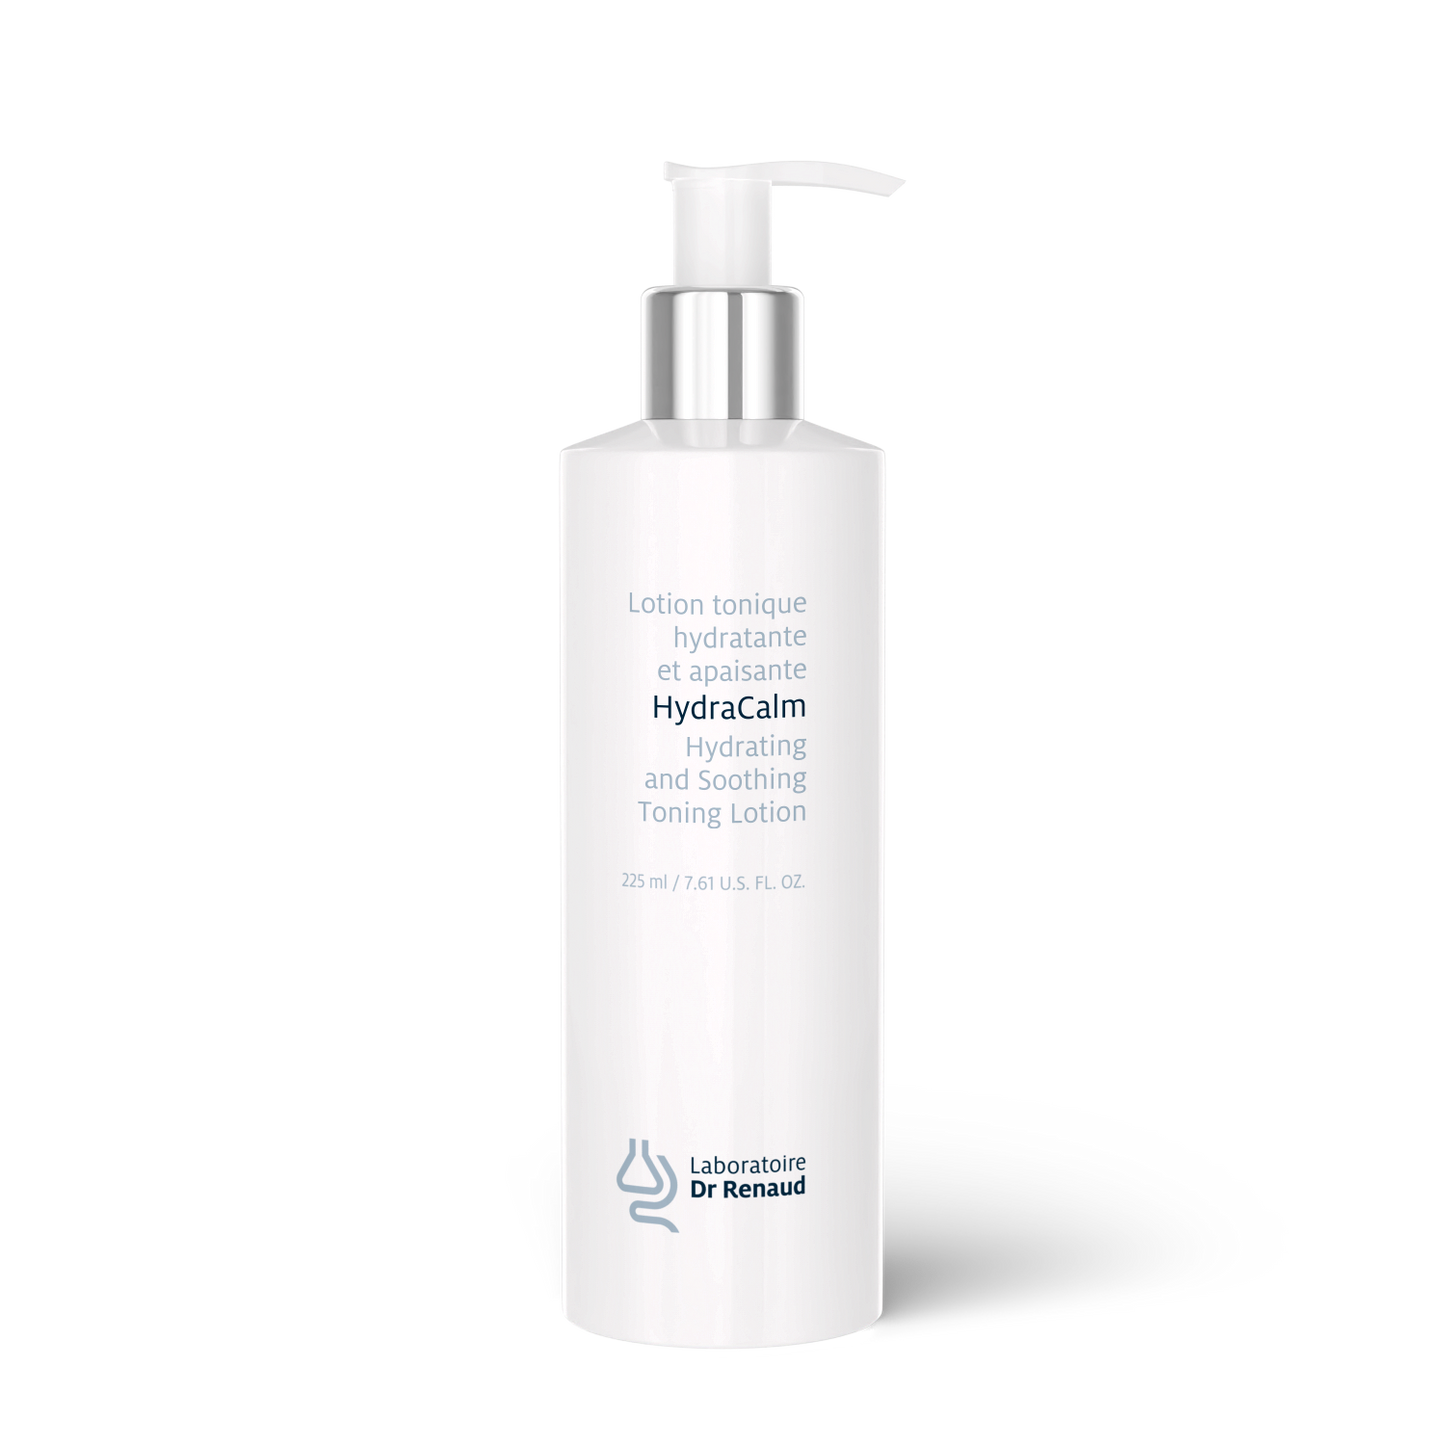 Dr. Renaud - Hydracalm Hydrating & Soothing Toning Lotion